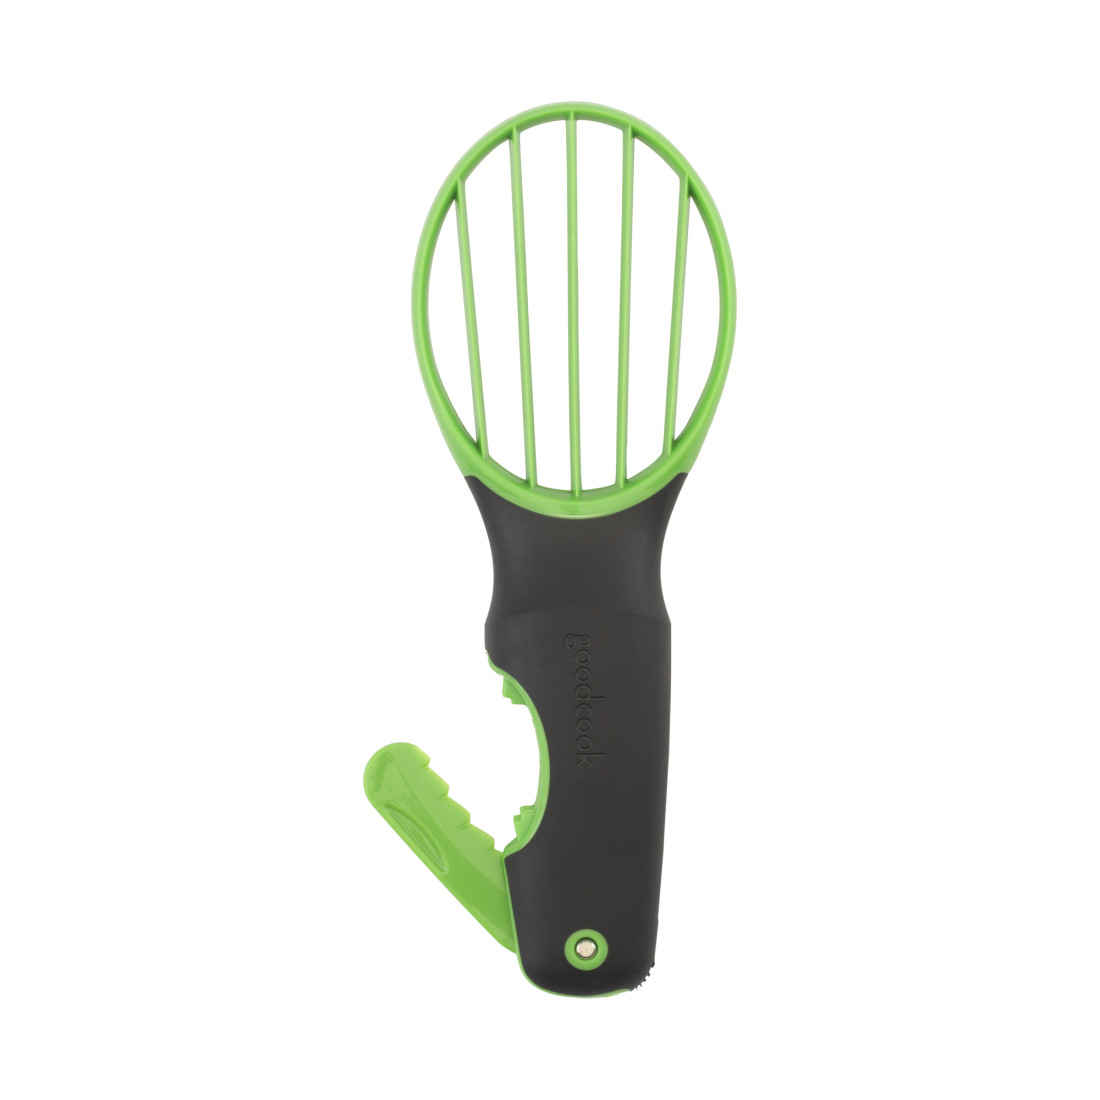 OXO 3-in-1 Avocado Slicer Review 2020: the Best Tool for Guacamole